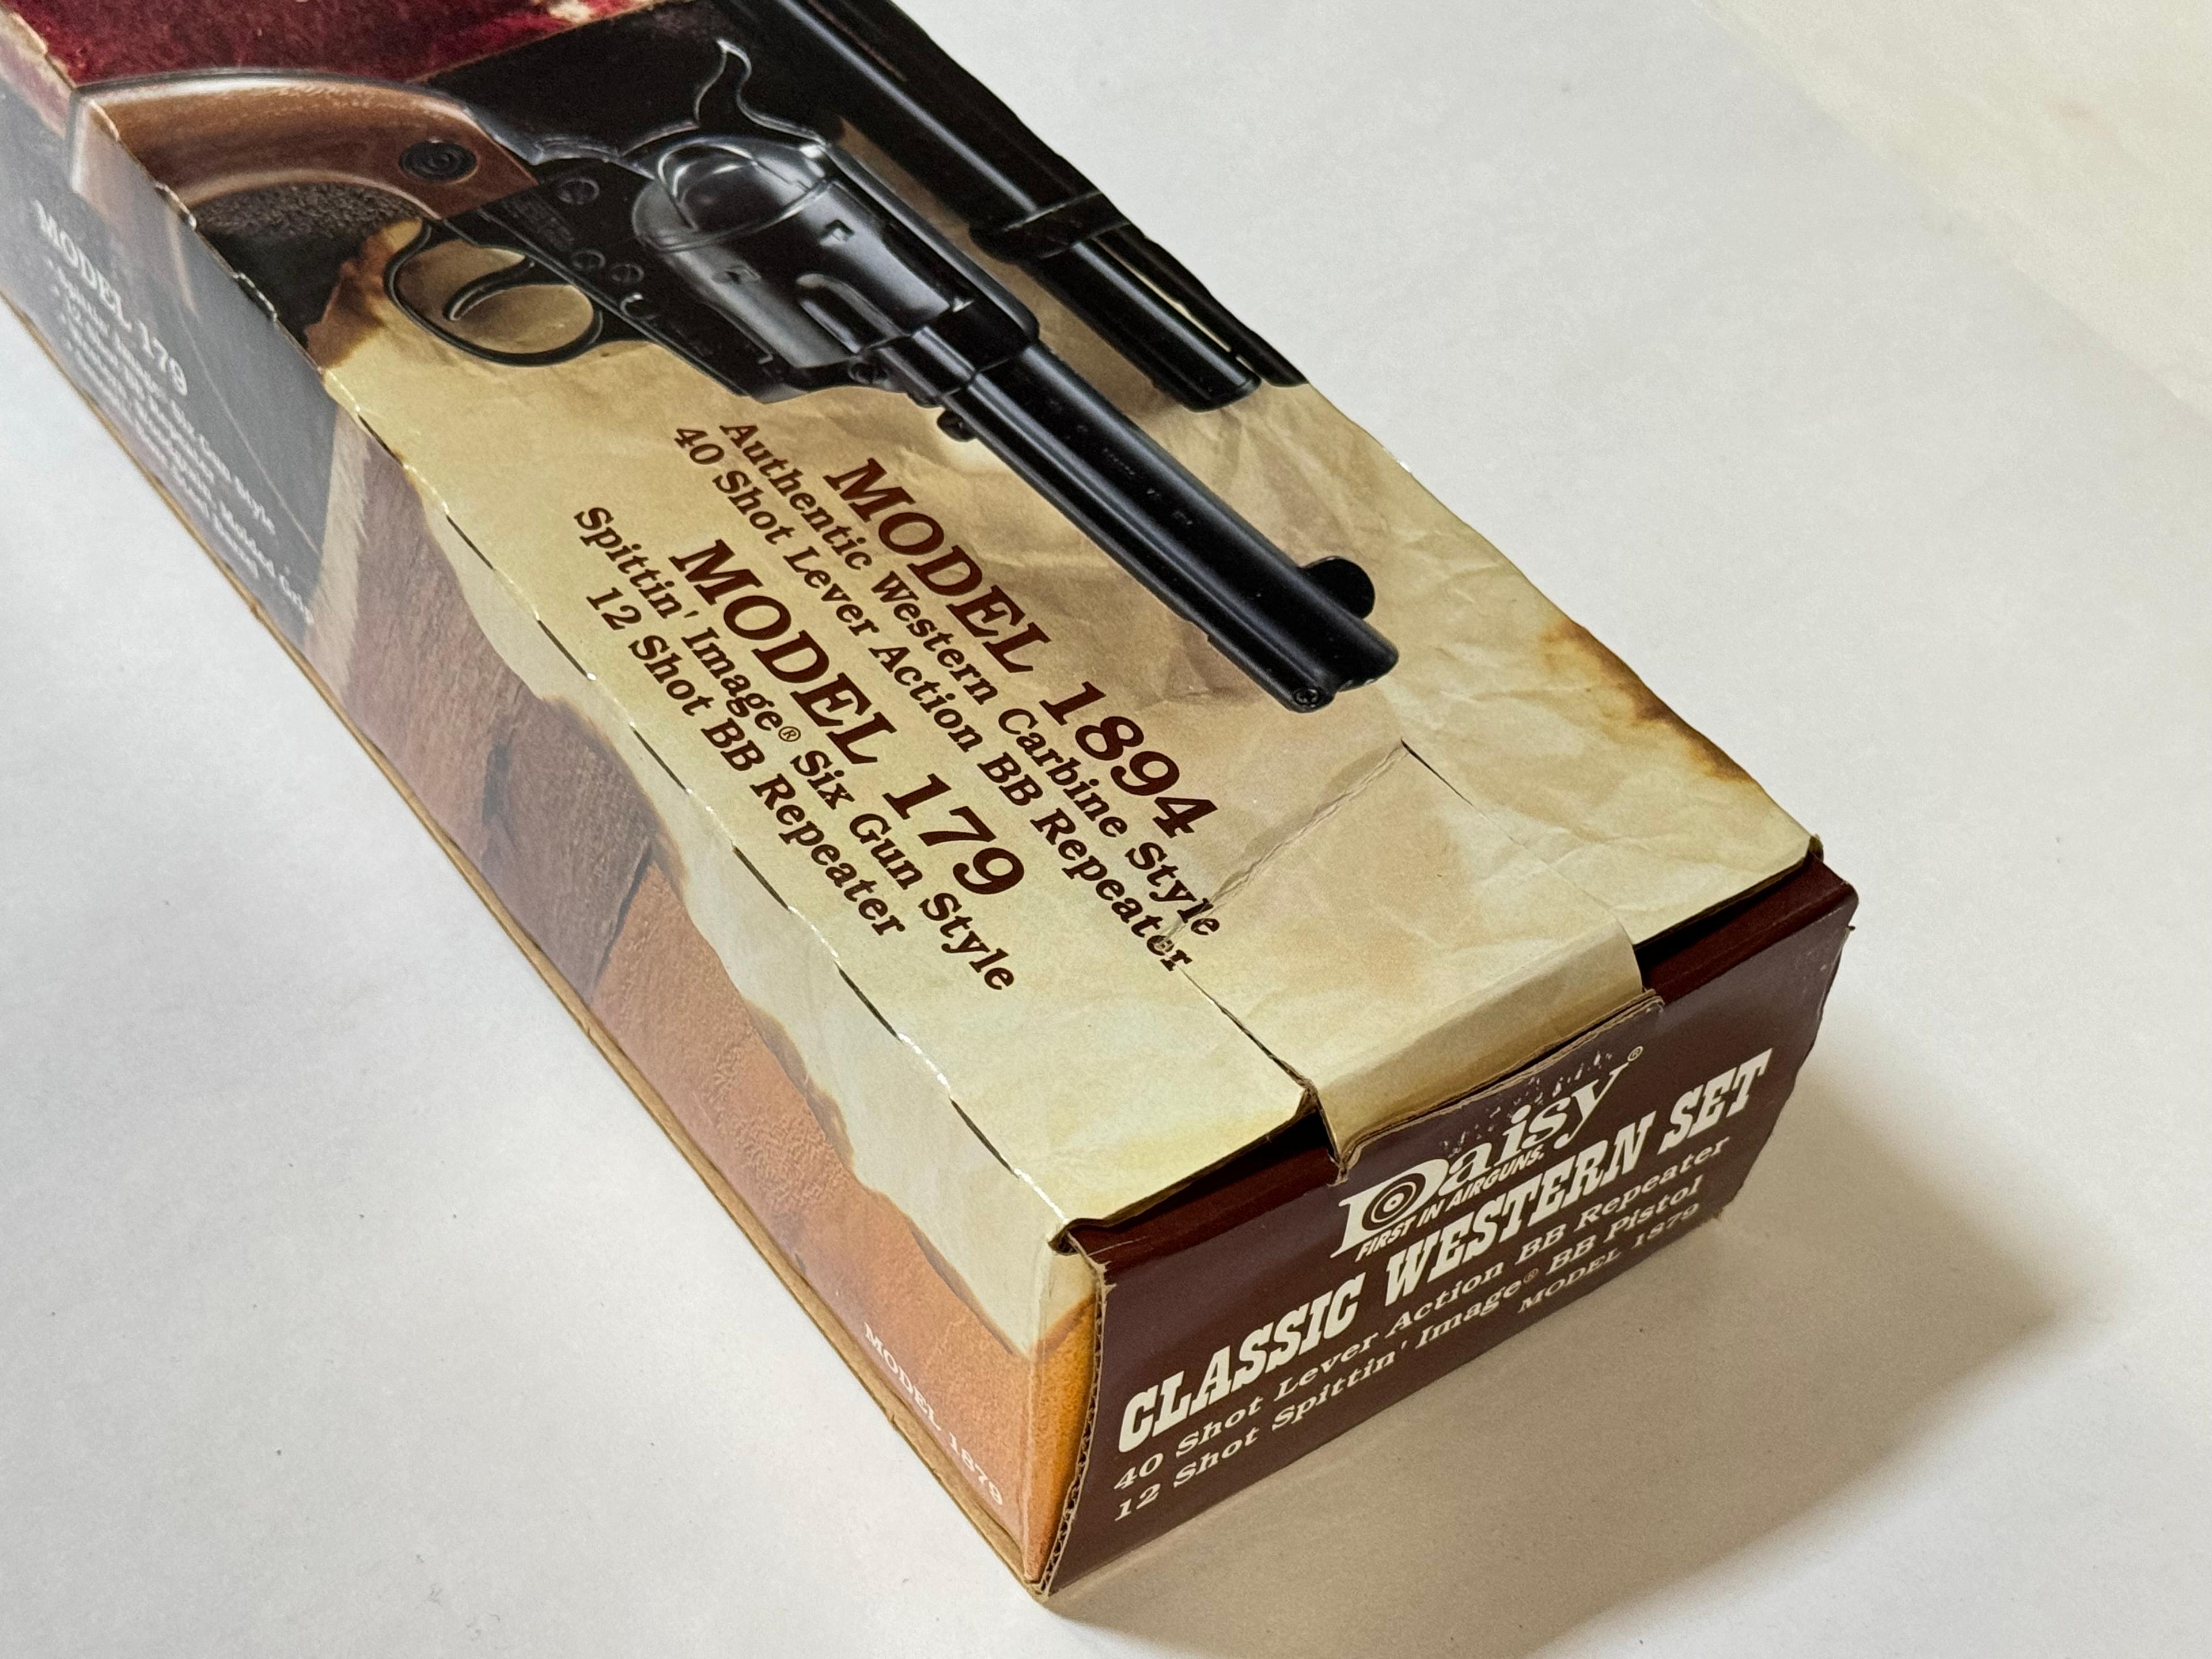 NIB Daisy Classic Western Set - Model 1894 Lever Action and Model 179 “Peacemaker” Revolver